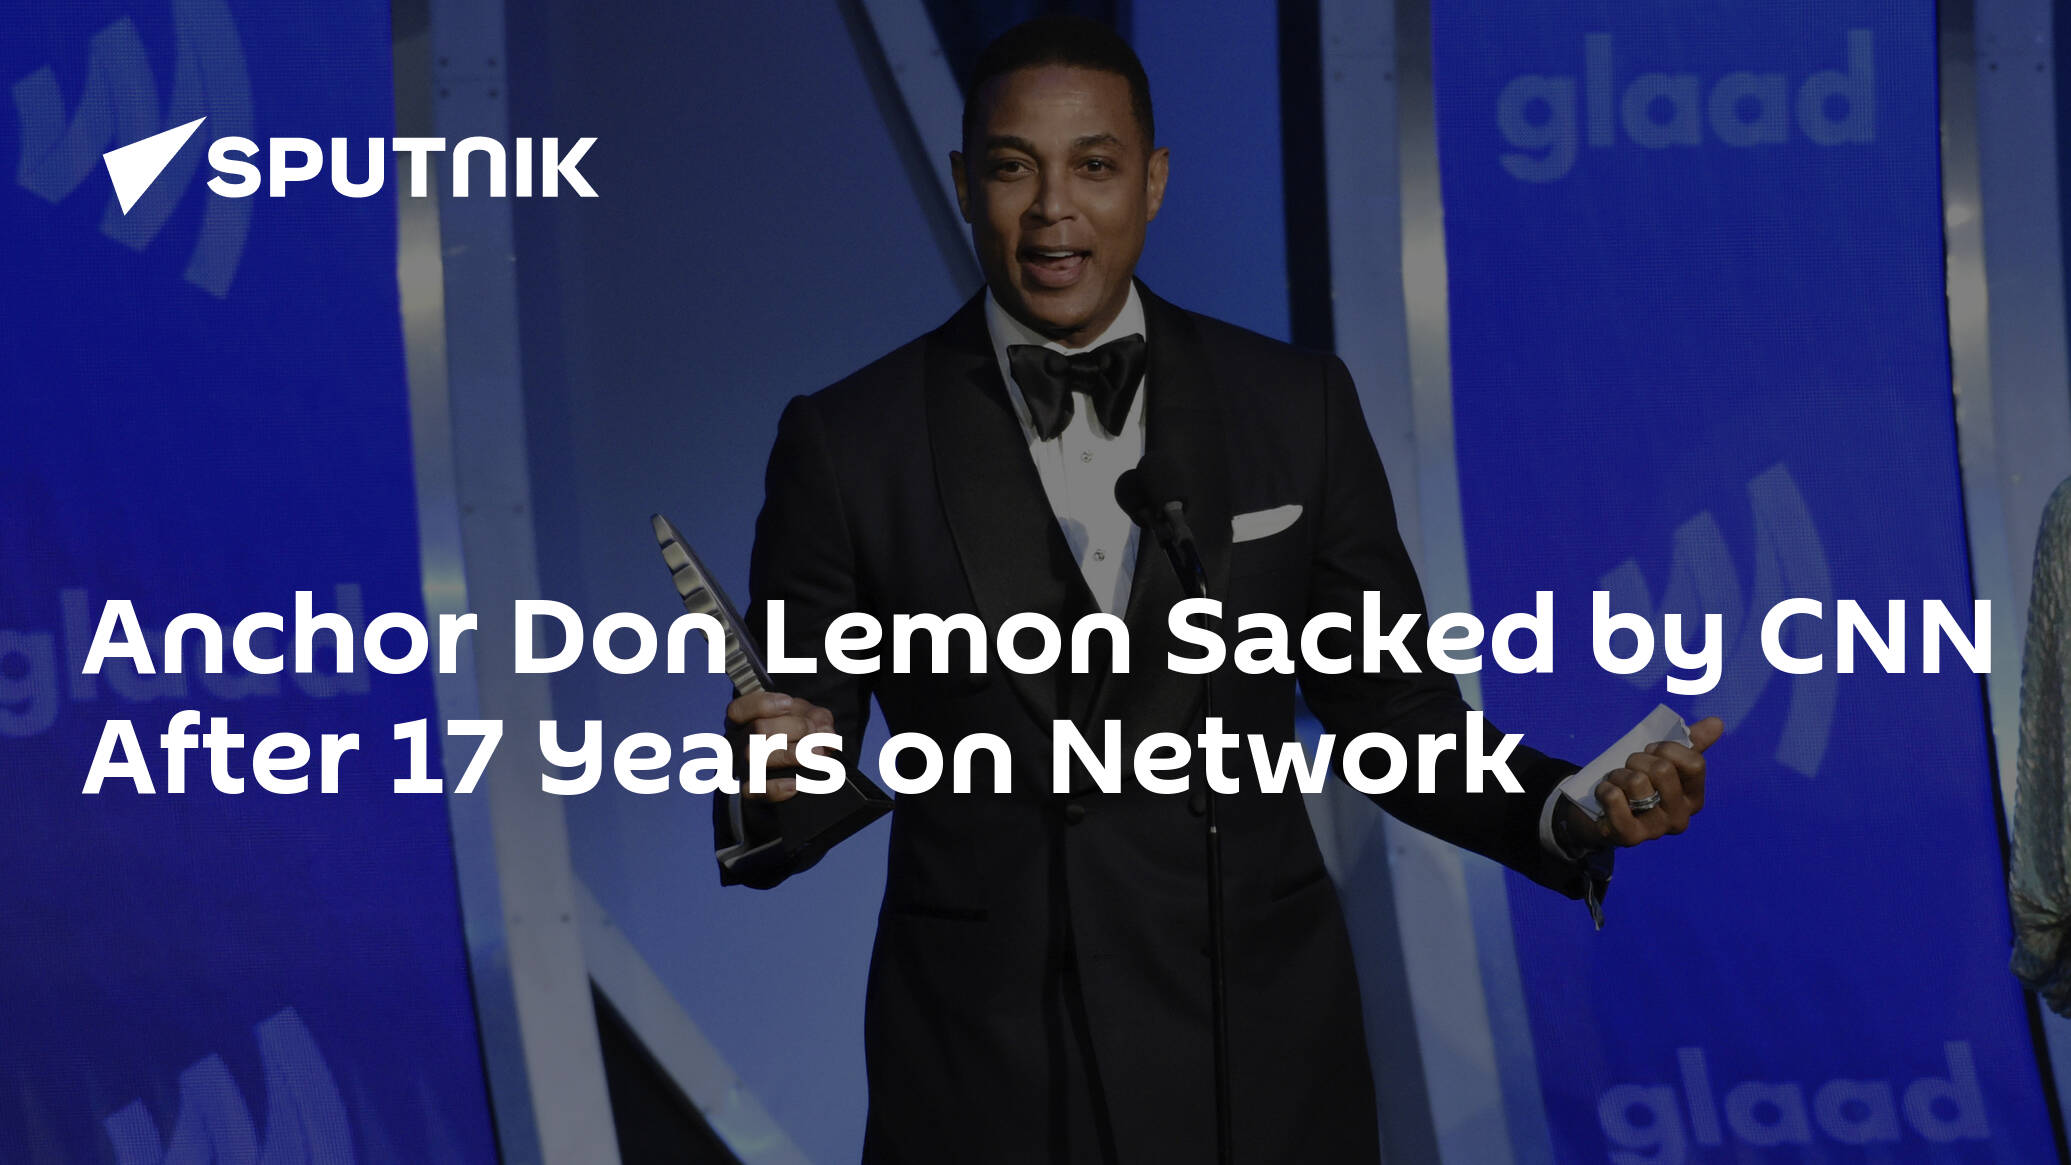 Anchor Don Lemon Terminated by CNN After 17 Years on Network